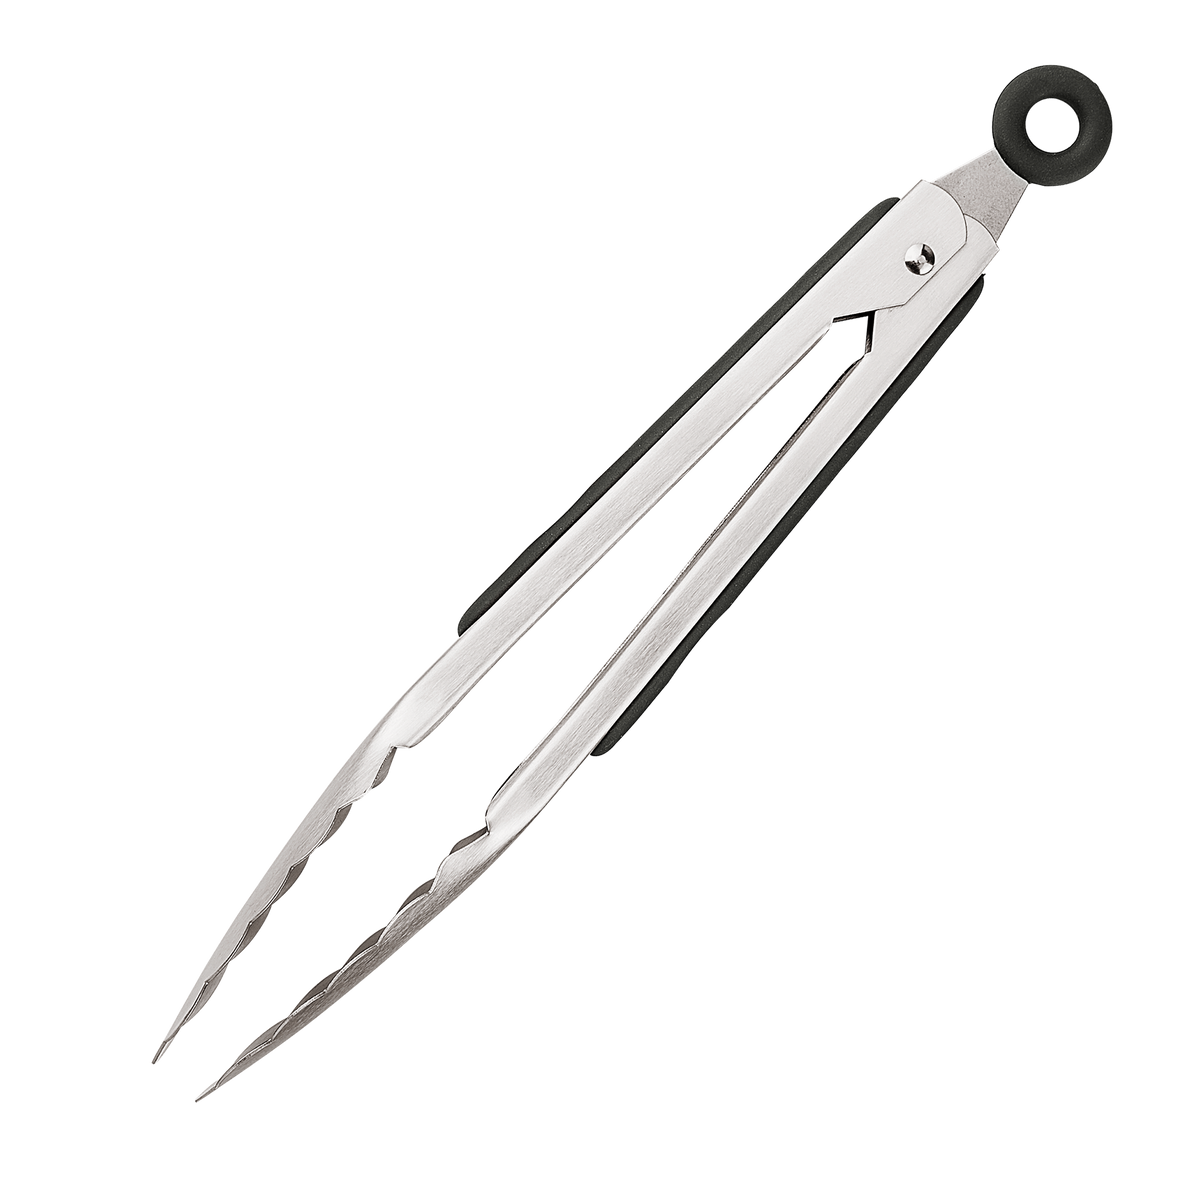 Product photo, side view, 9 inch stainless steel tongs, in closed and locked position.